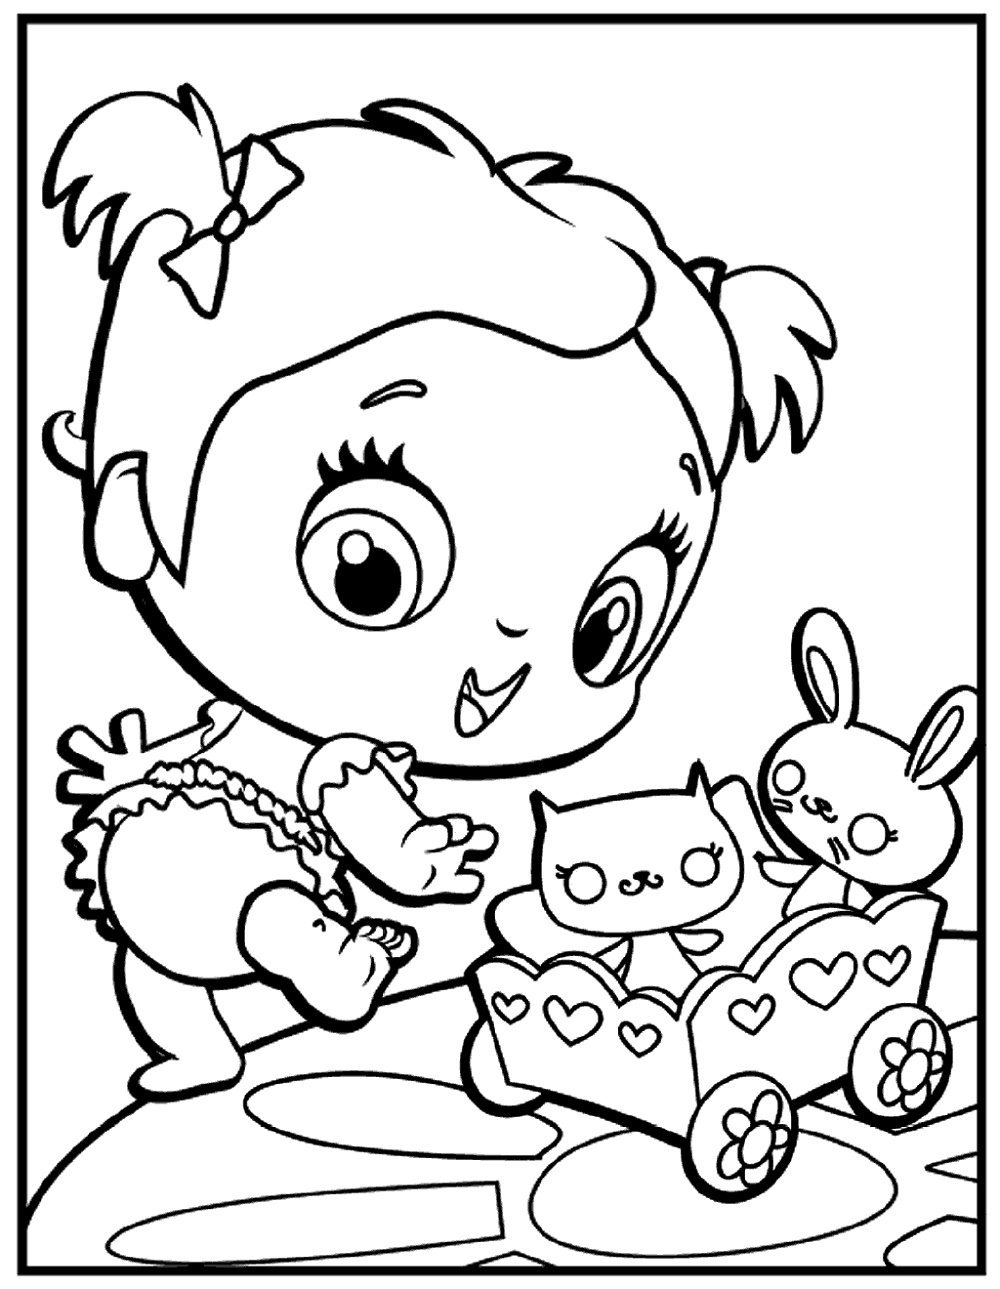 color alive coloring pages baby alive coloring pages educative printable pages alive coloring color 